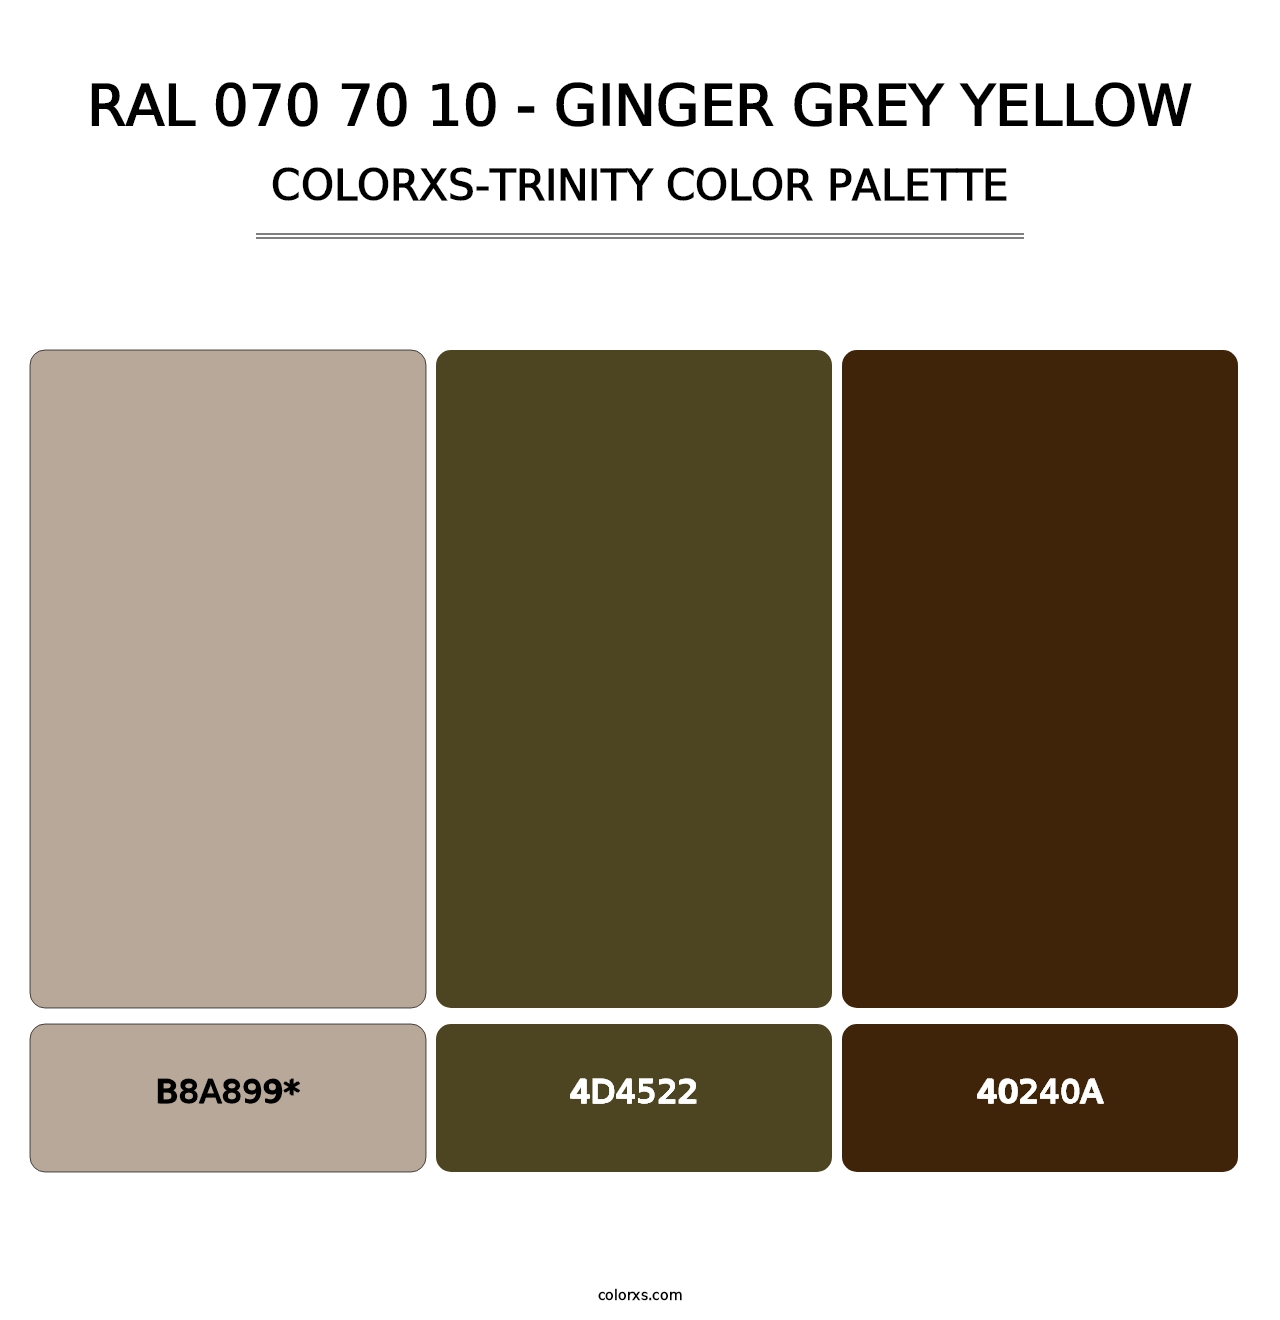 RAL 070 70 10 - Ginger Grey Yellow - Colorxs Trinity Palette